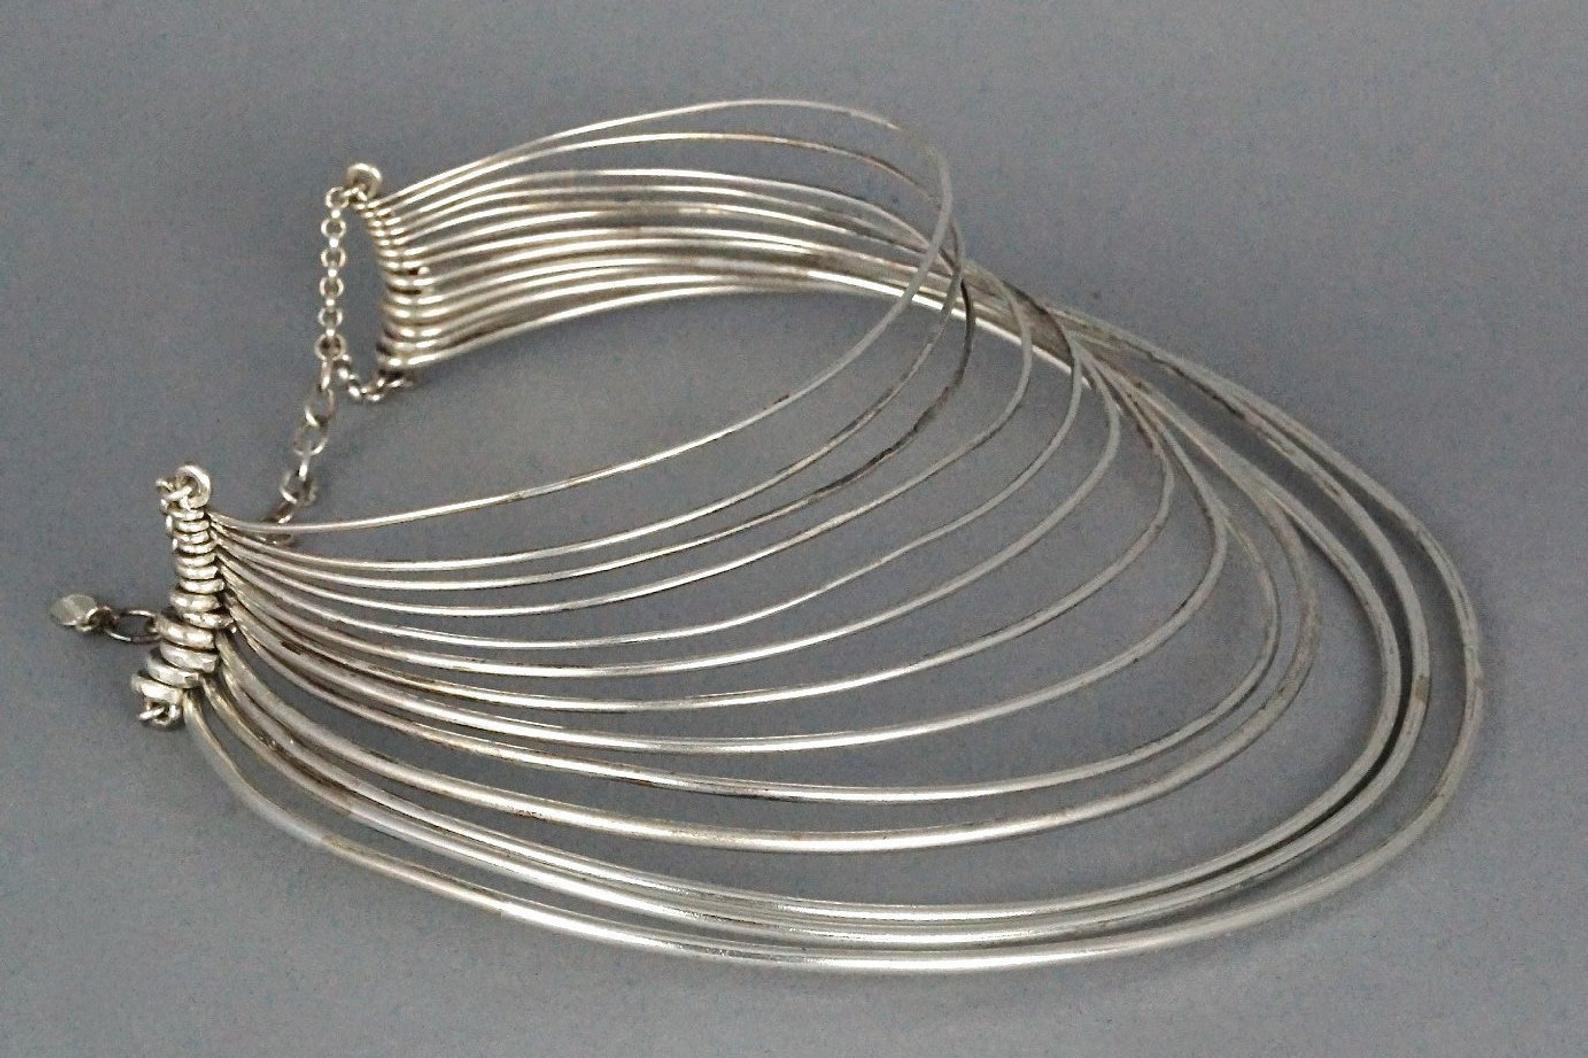 Vintage JEAN PAUL GAULTIER Masai Multi Wire Silver Choker Necklace In Good Condition For Sale In Kingersheim, Alsace